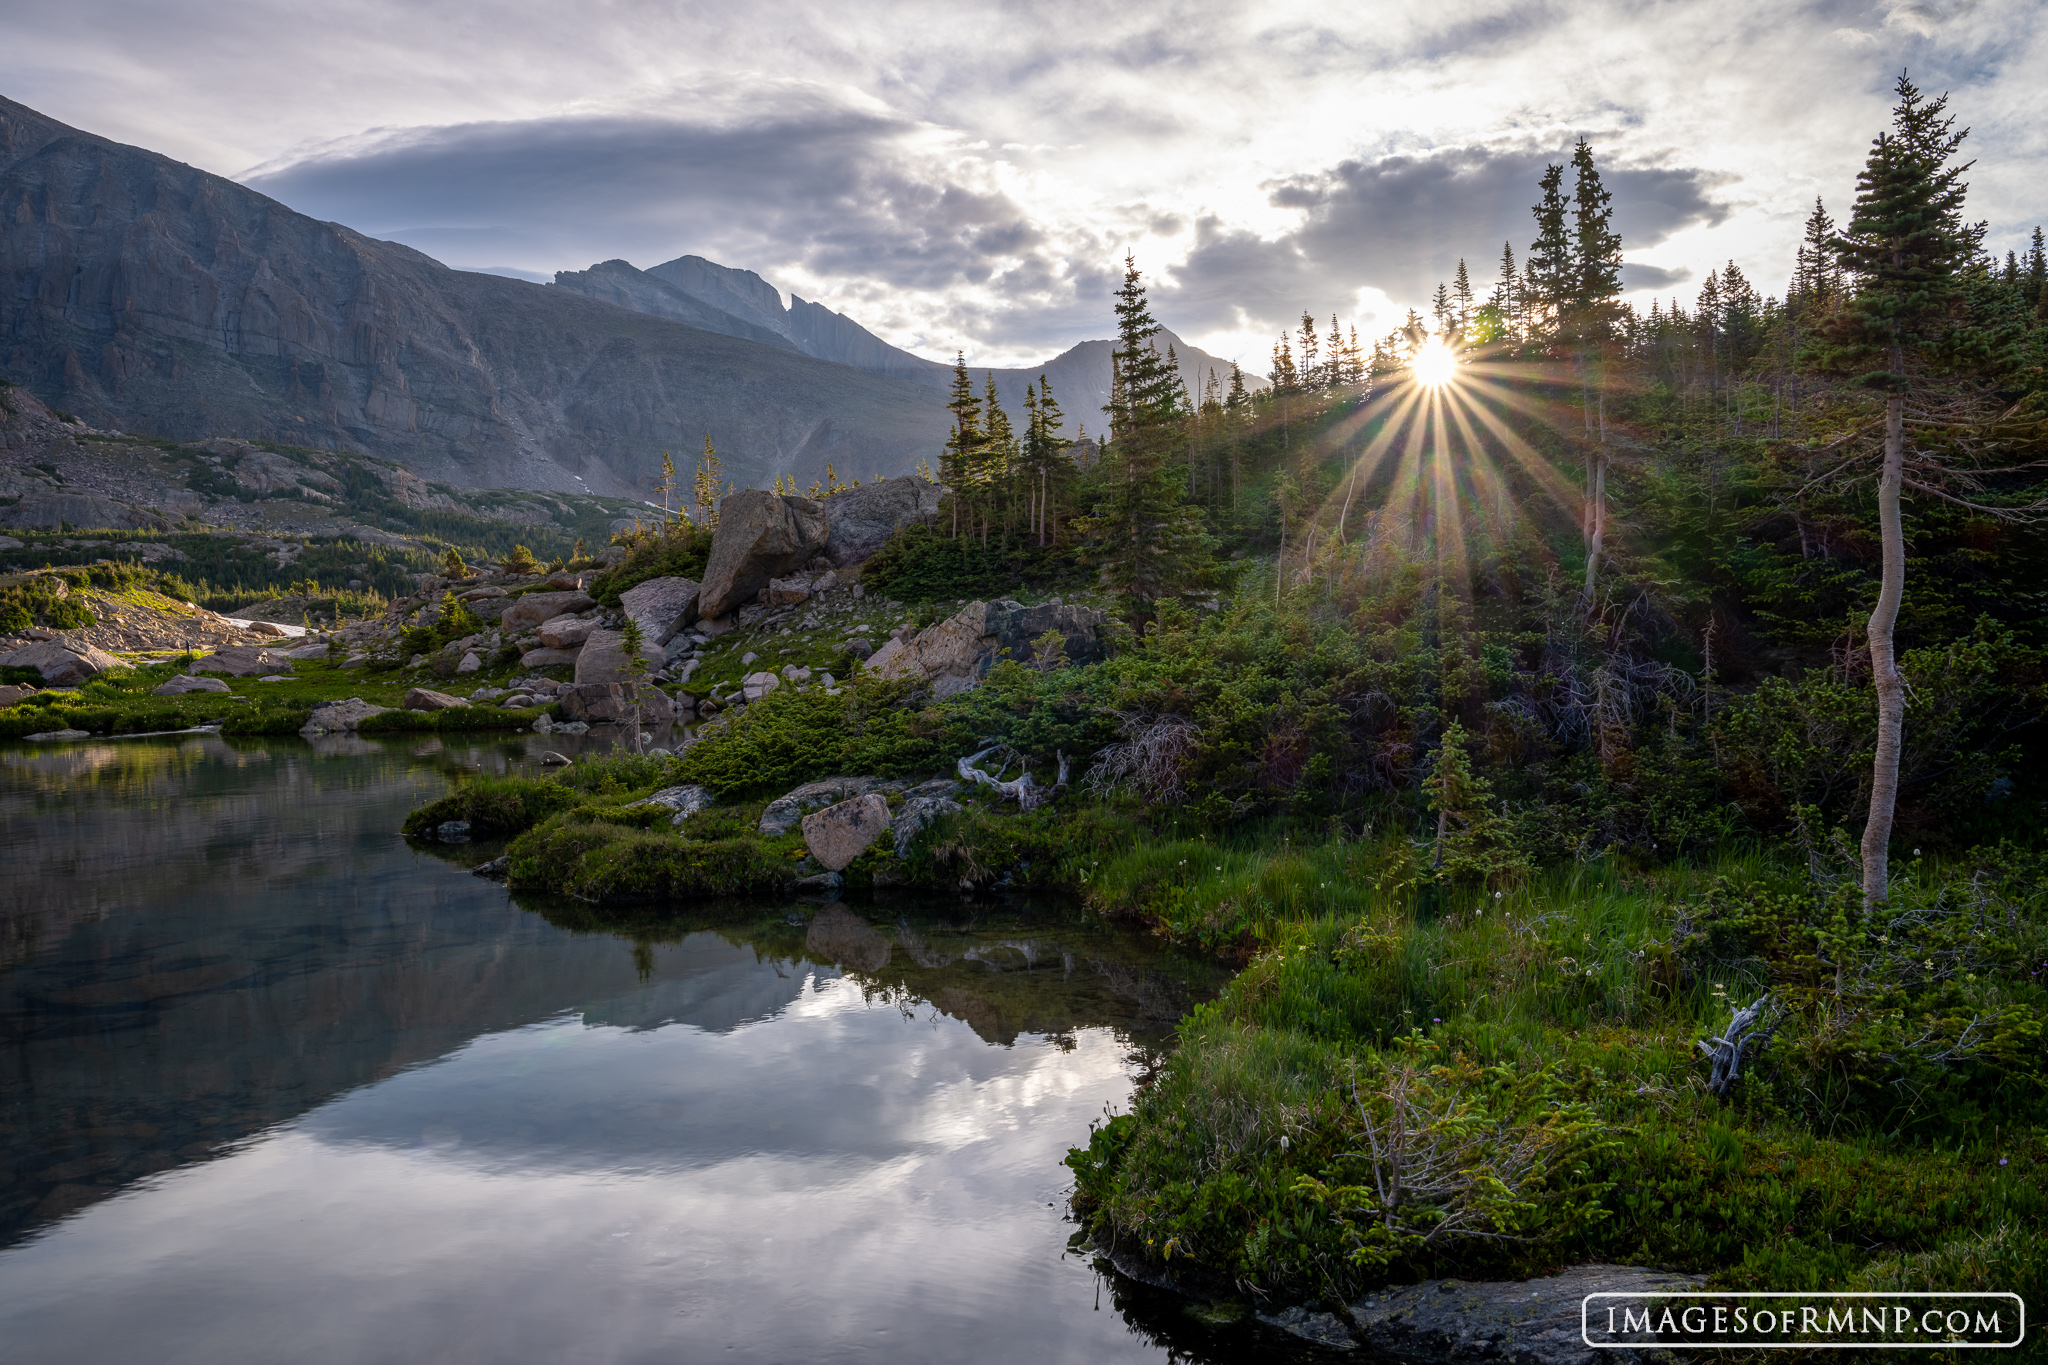 In late July, the sun appears over the krumholz as if to wish good morning to this remote tarn deep in the backcountry of Rocky...